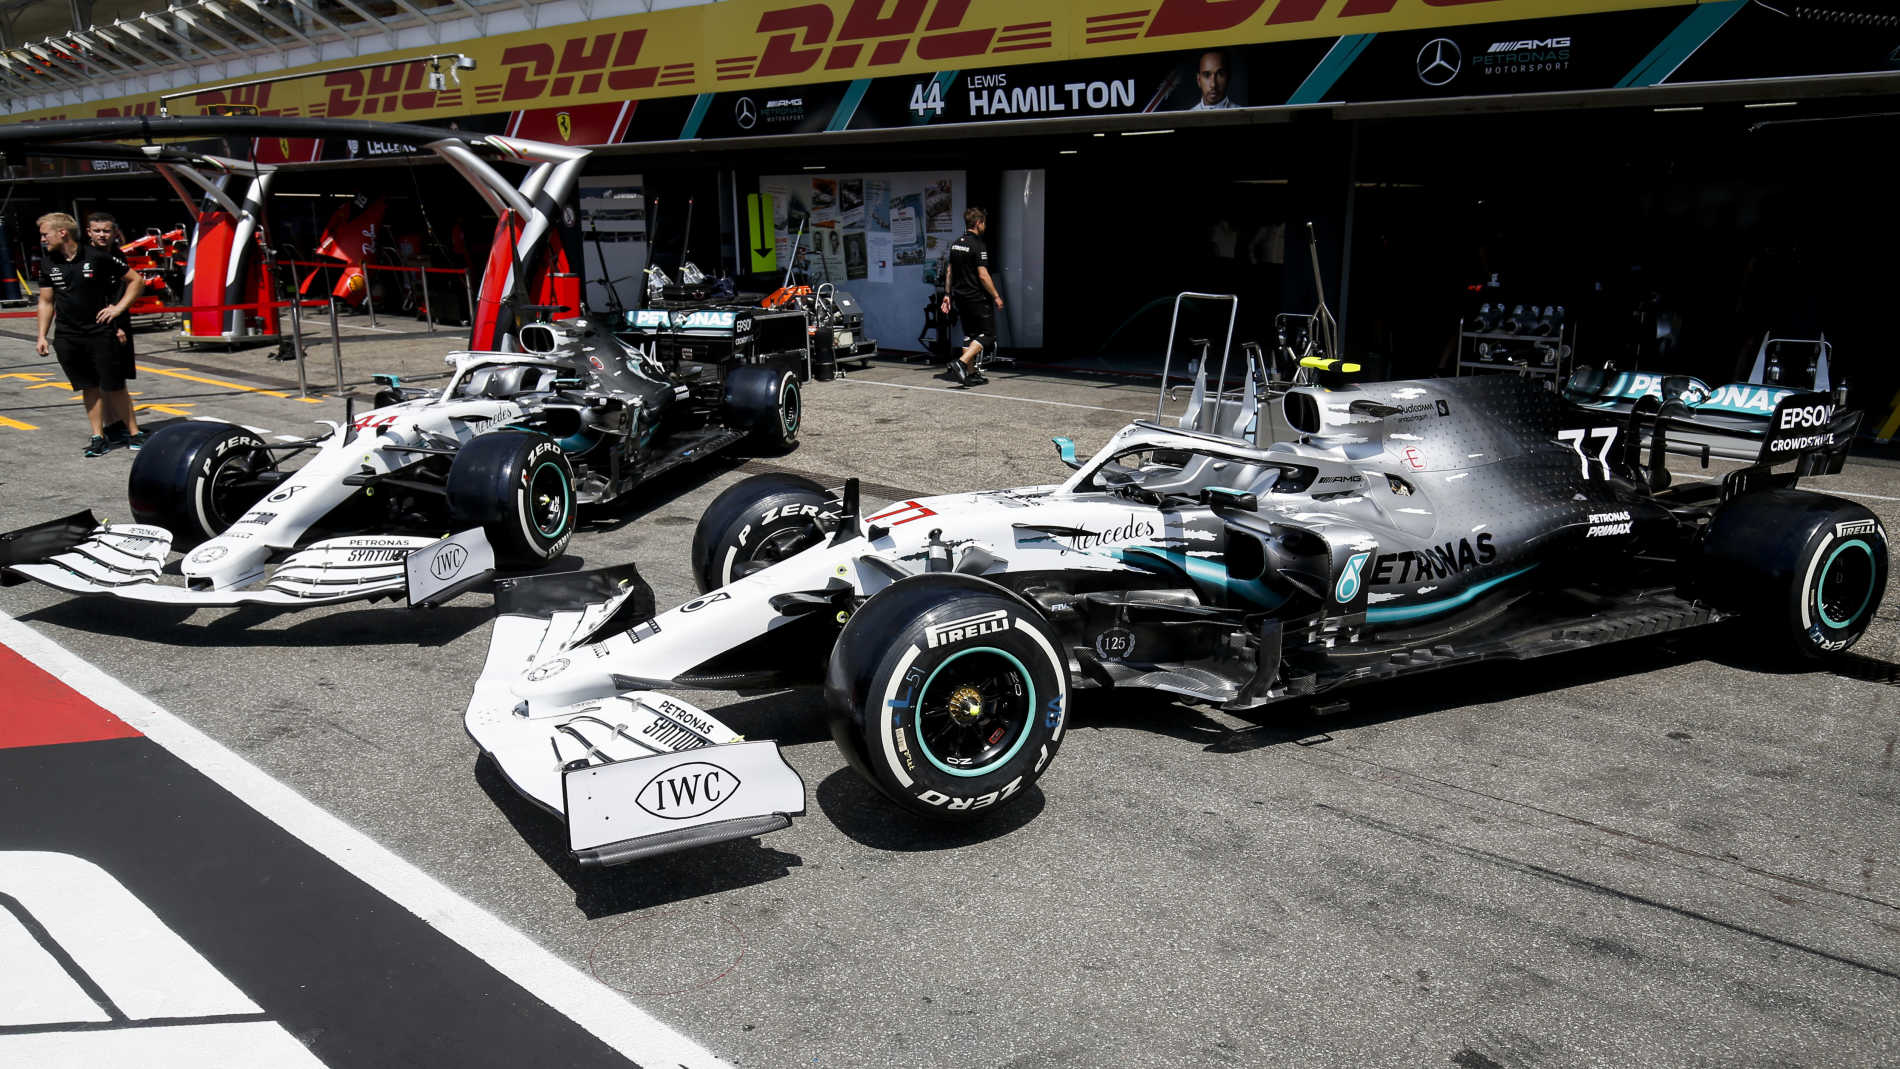 Mercedes unveil special special heritage livery for 2019 German Grand Prix Formula 1®